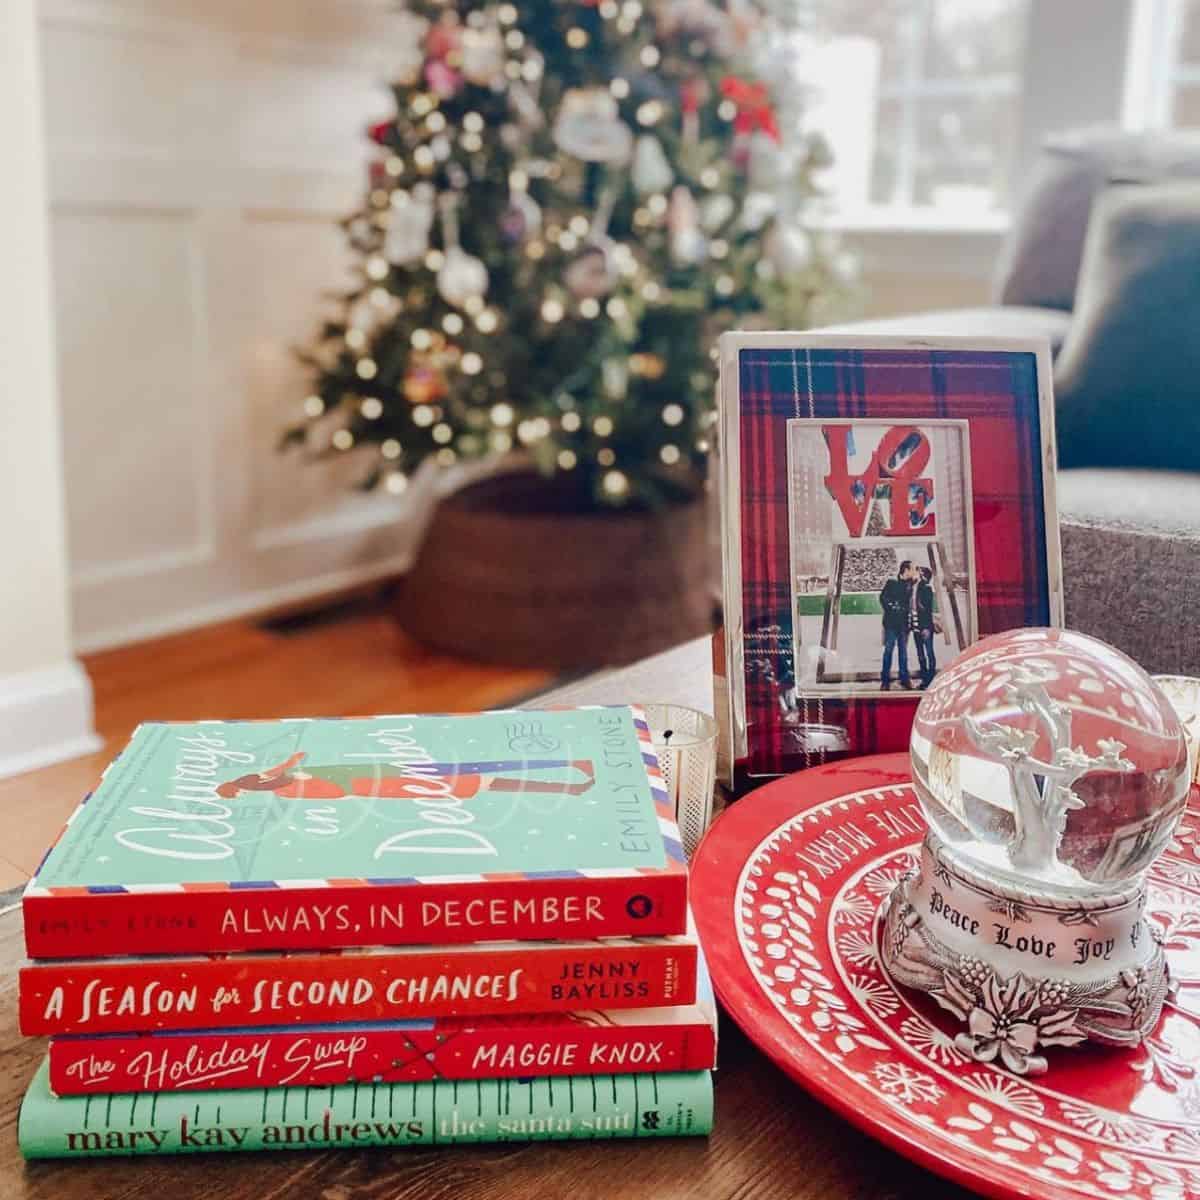 stack of Christmas romance books in front of tree and near holiday decor.